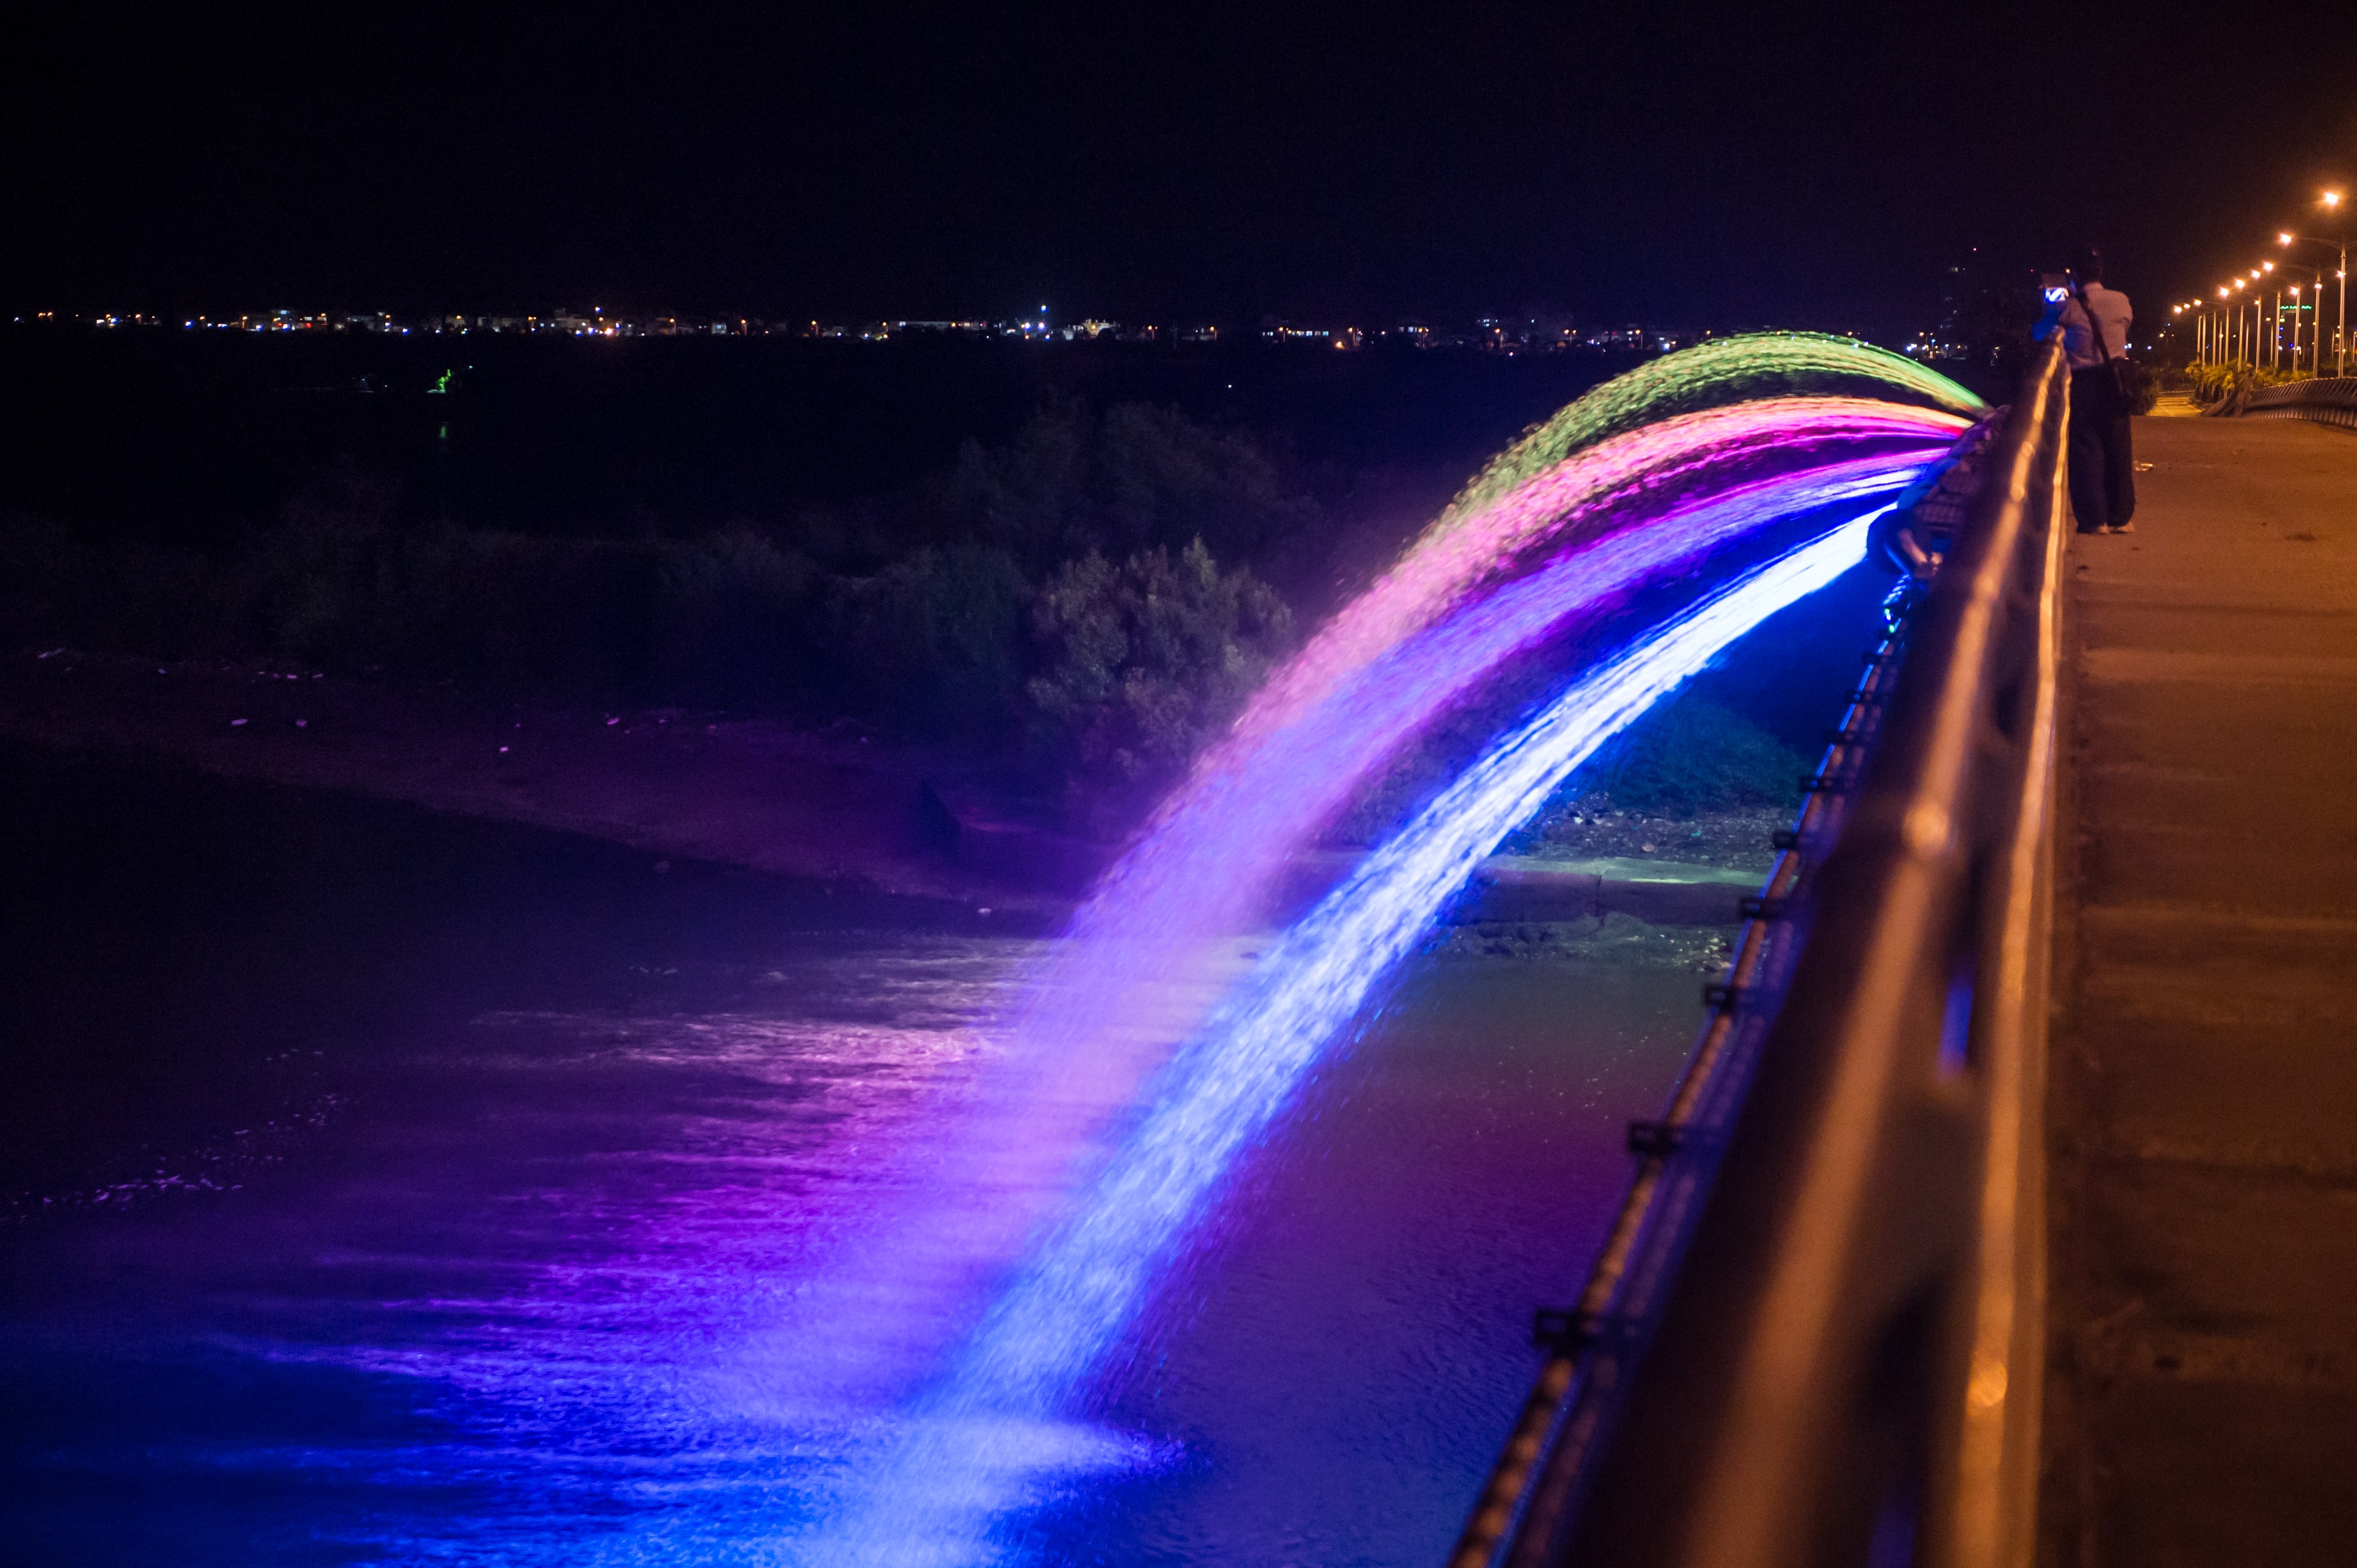 Rainbow Water Dance & Light Show of Sankong Bridge turns the bay into a tantalizing place